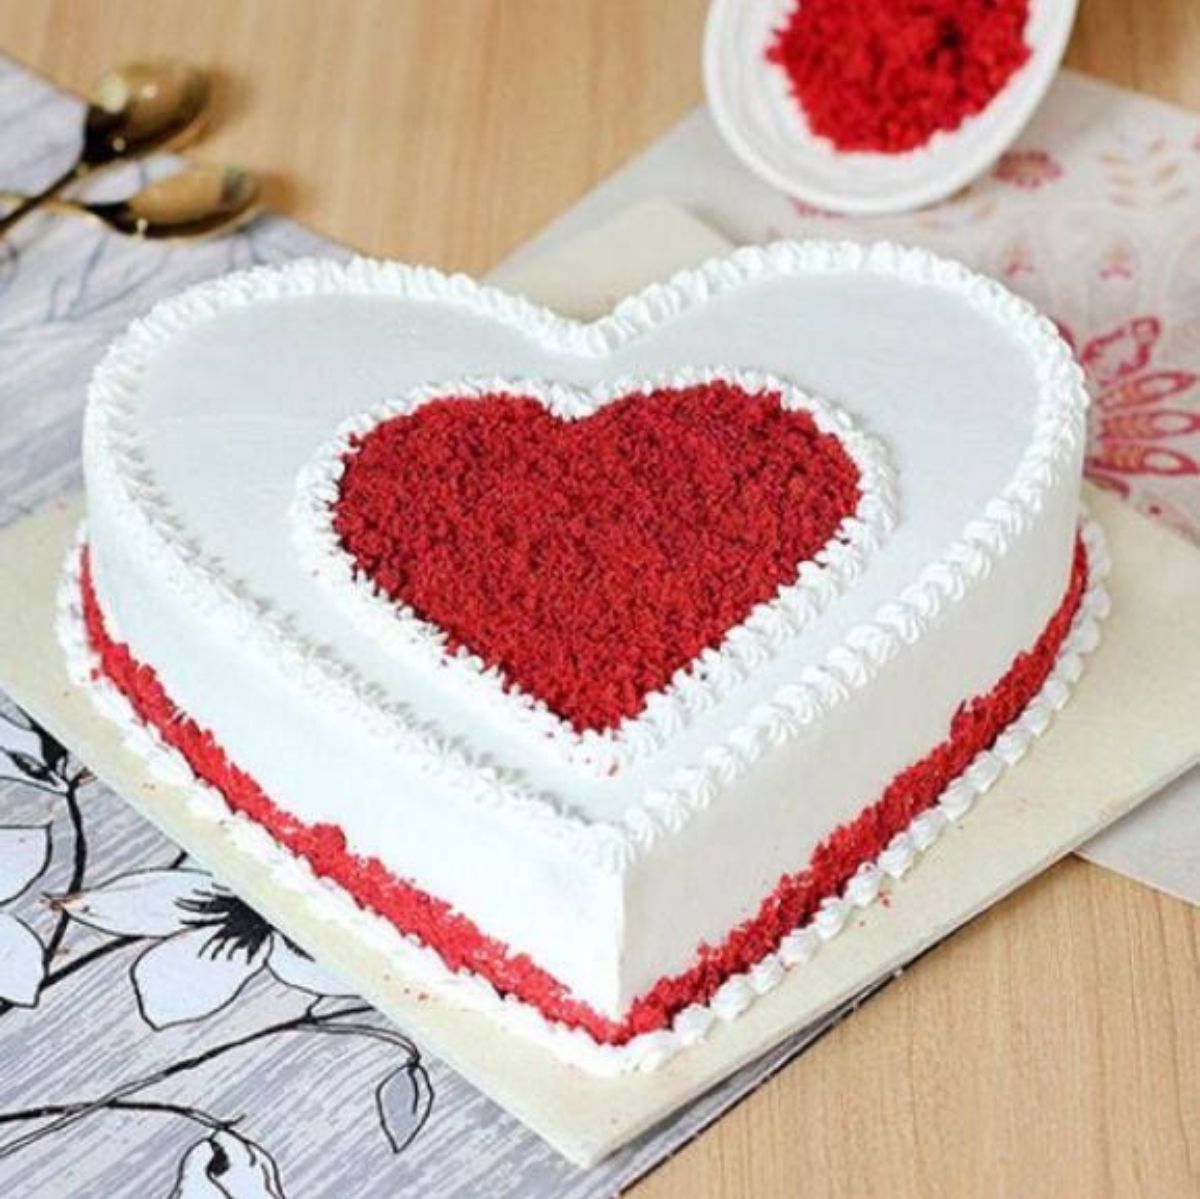 How to Make a Surprise Cake with Heart Inside-cacanhphuclong.com.vn